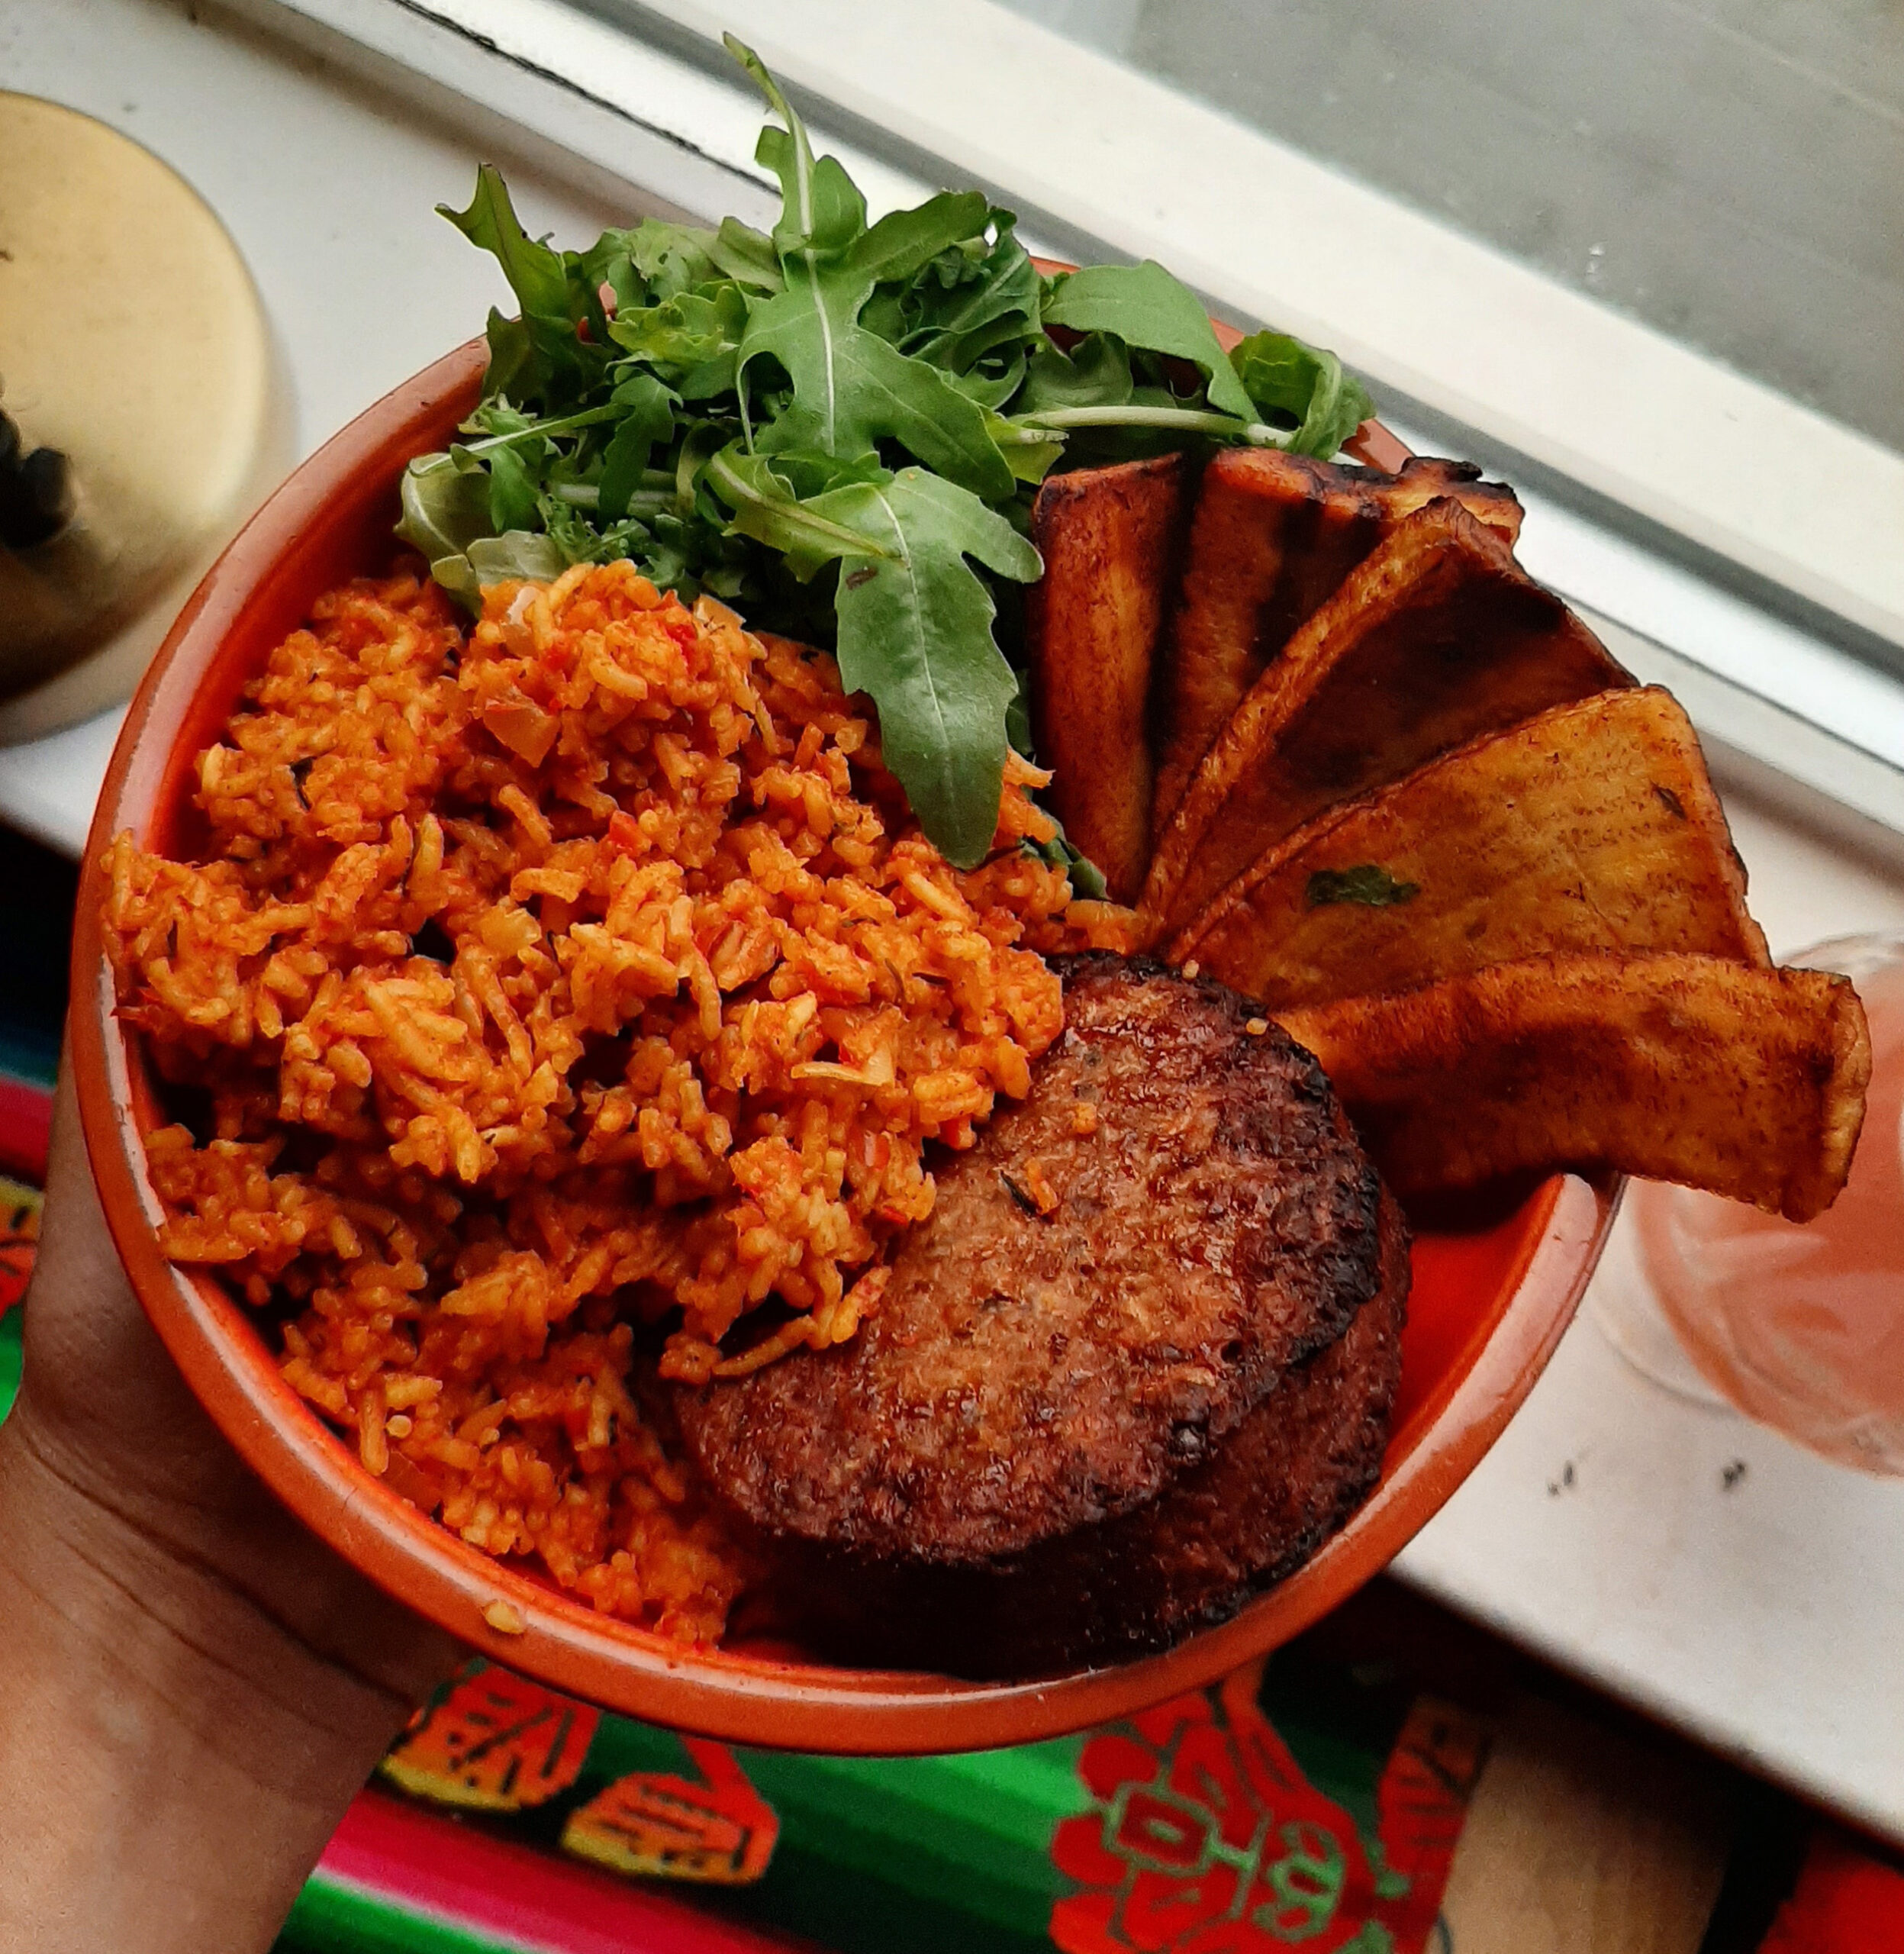 Overhead view of a bowl of jollof rice with a veggie burger, sliced plantain and rocket leaves arranged attractively